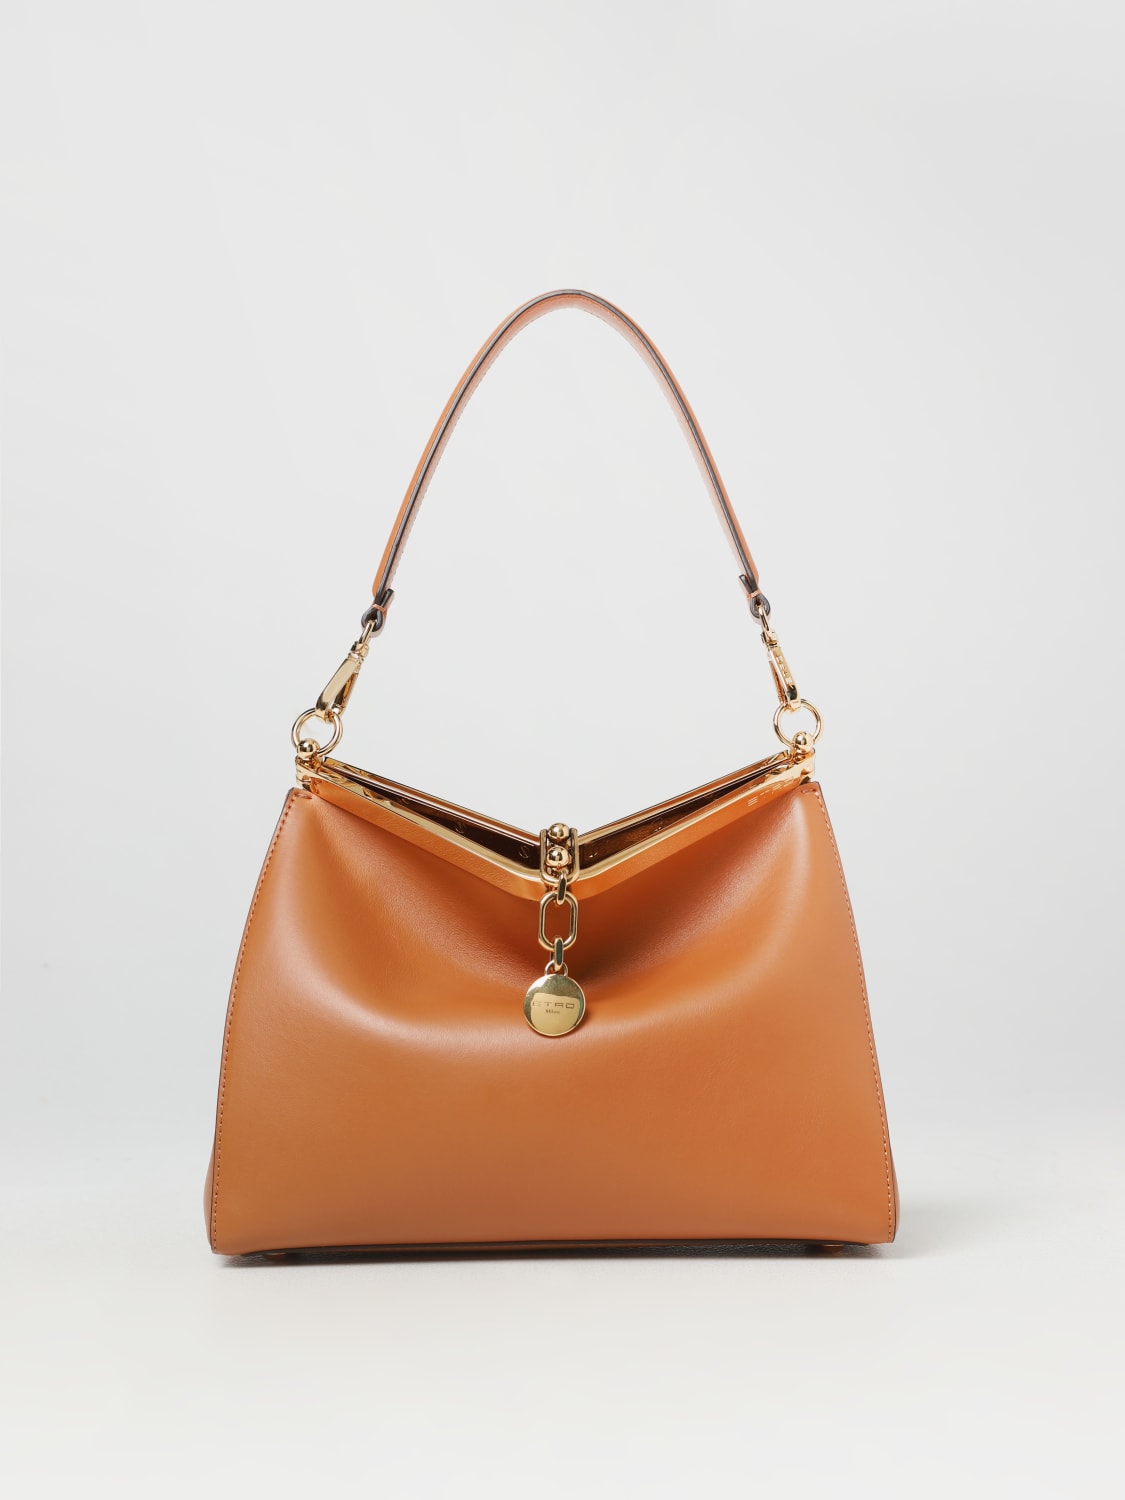 Vela Etro Bag in Leather with Logo Charm